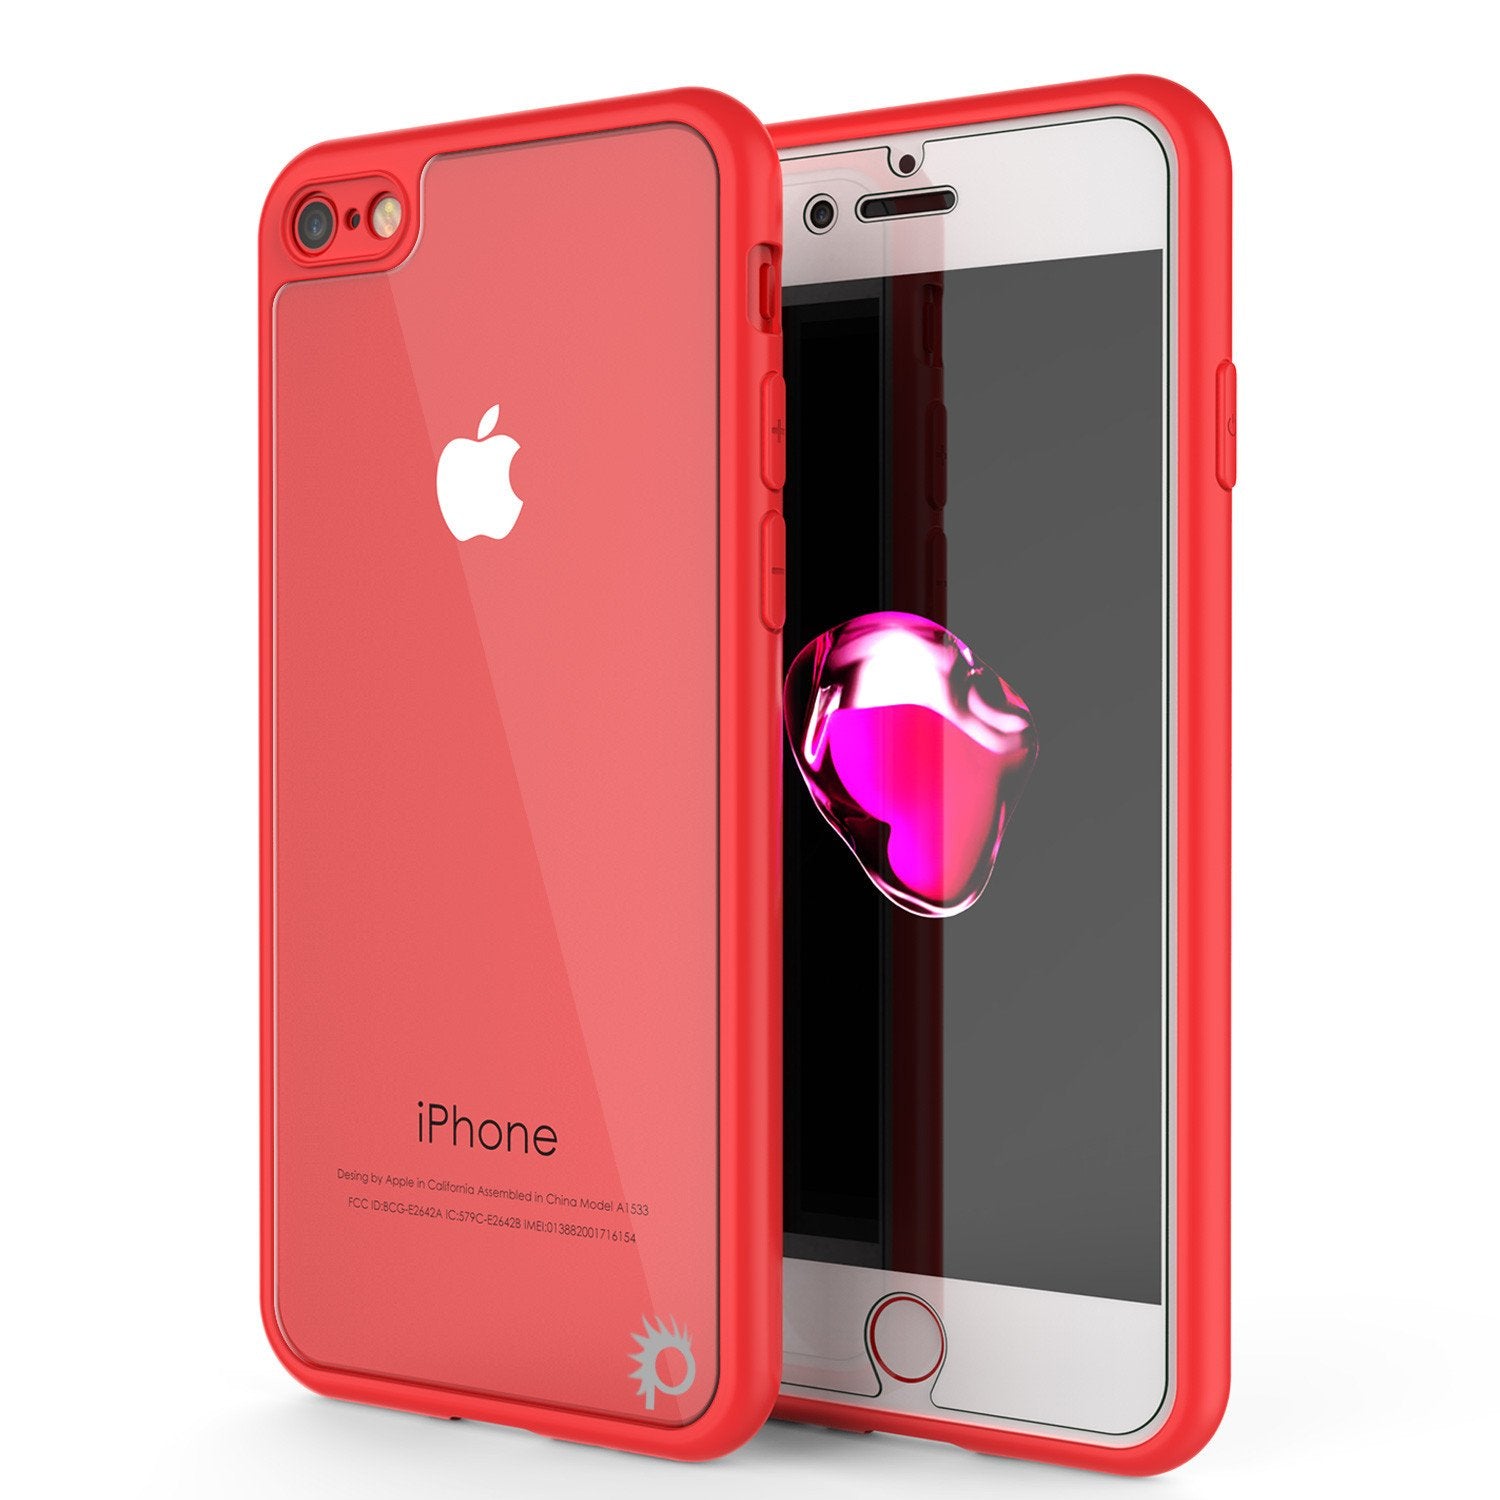 iPhone 7 Case [MASK Series] [RED] Full Body Hybrid Dual Layer TPU Cover W/ protective Tempered Glass Screen Protector - PunkCase NZ